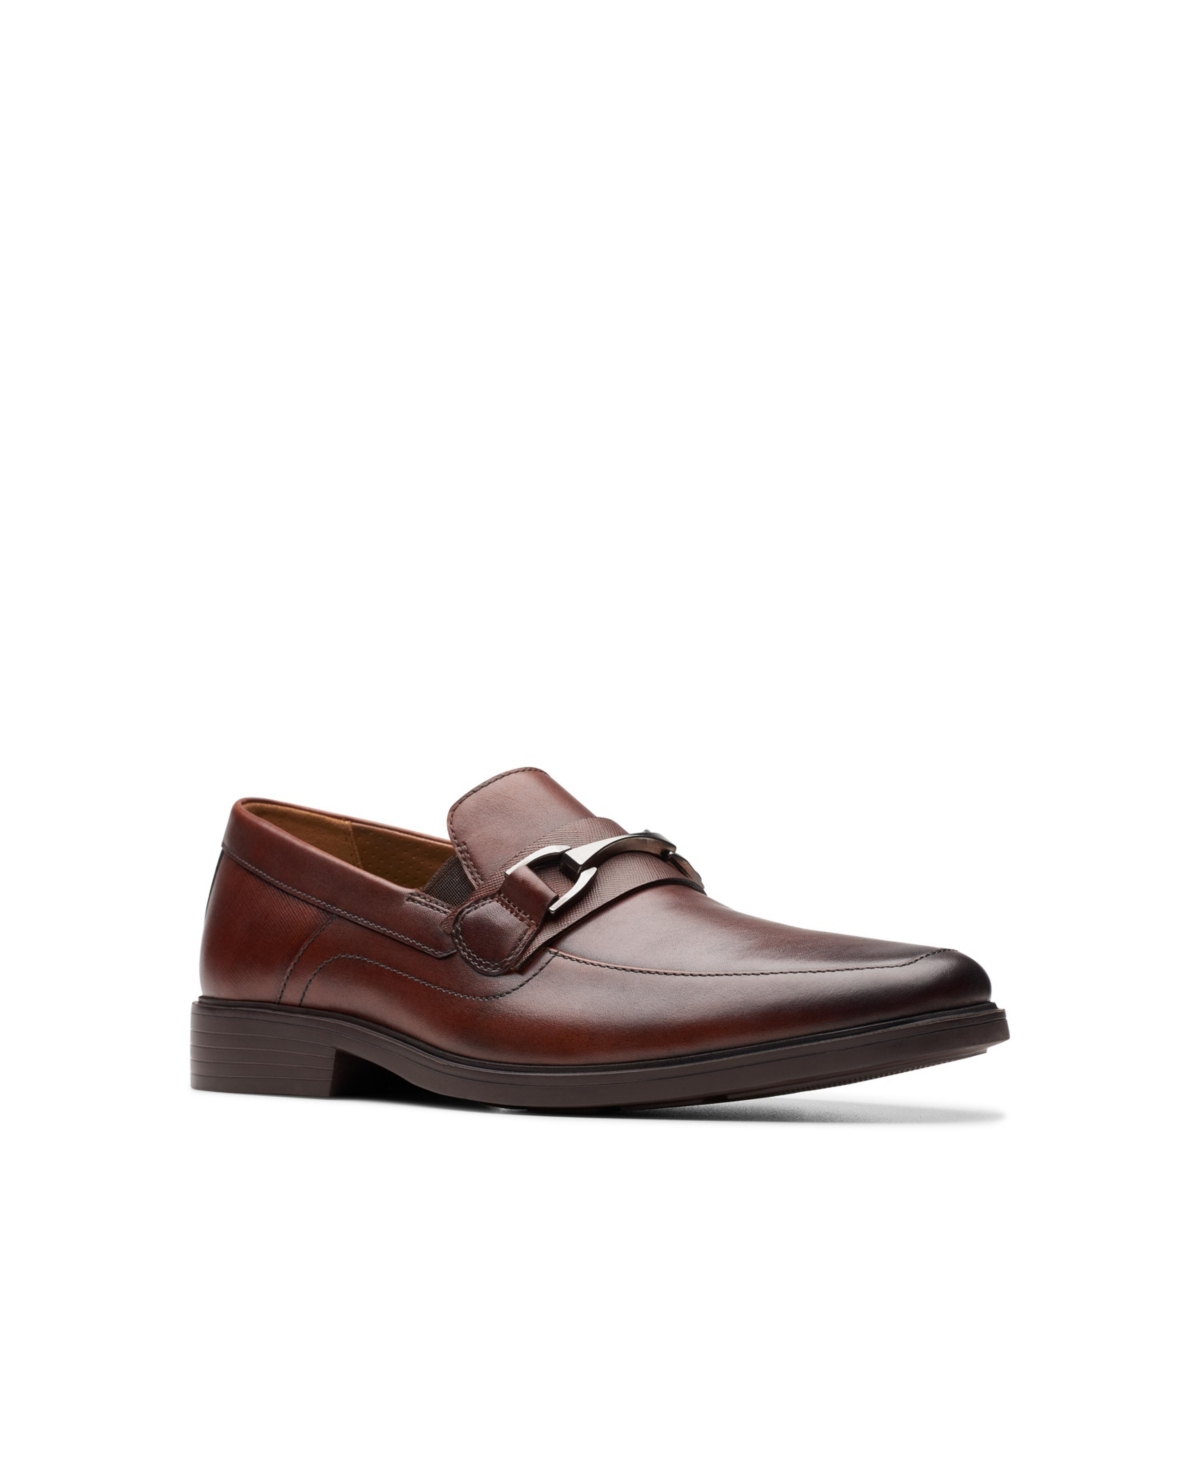 Clarks Men's Collection Lite Bit Slip On Loafers In Mahogany Leather